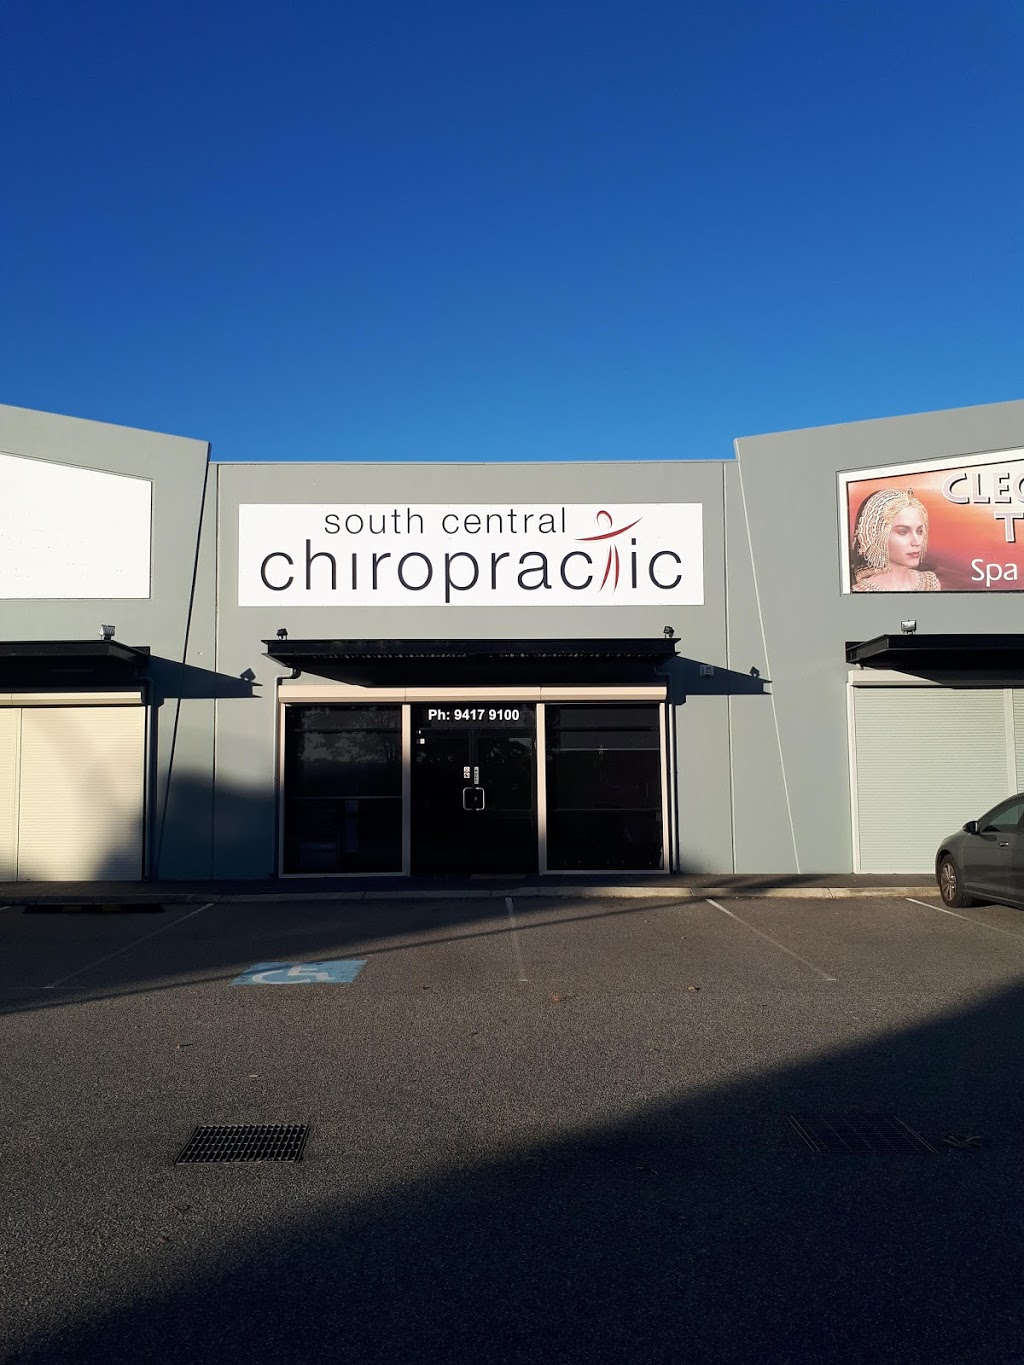 Align Chiro & Health - Physiotherapy | physiotherapist | Unit 4/752 N Lake Rd, South Lake WA 6164, Australia | 0894179100 OR +61 8 9417 9100